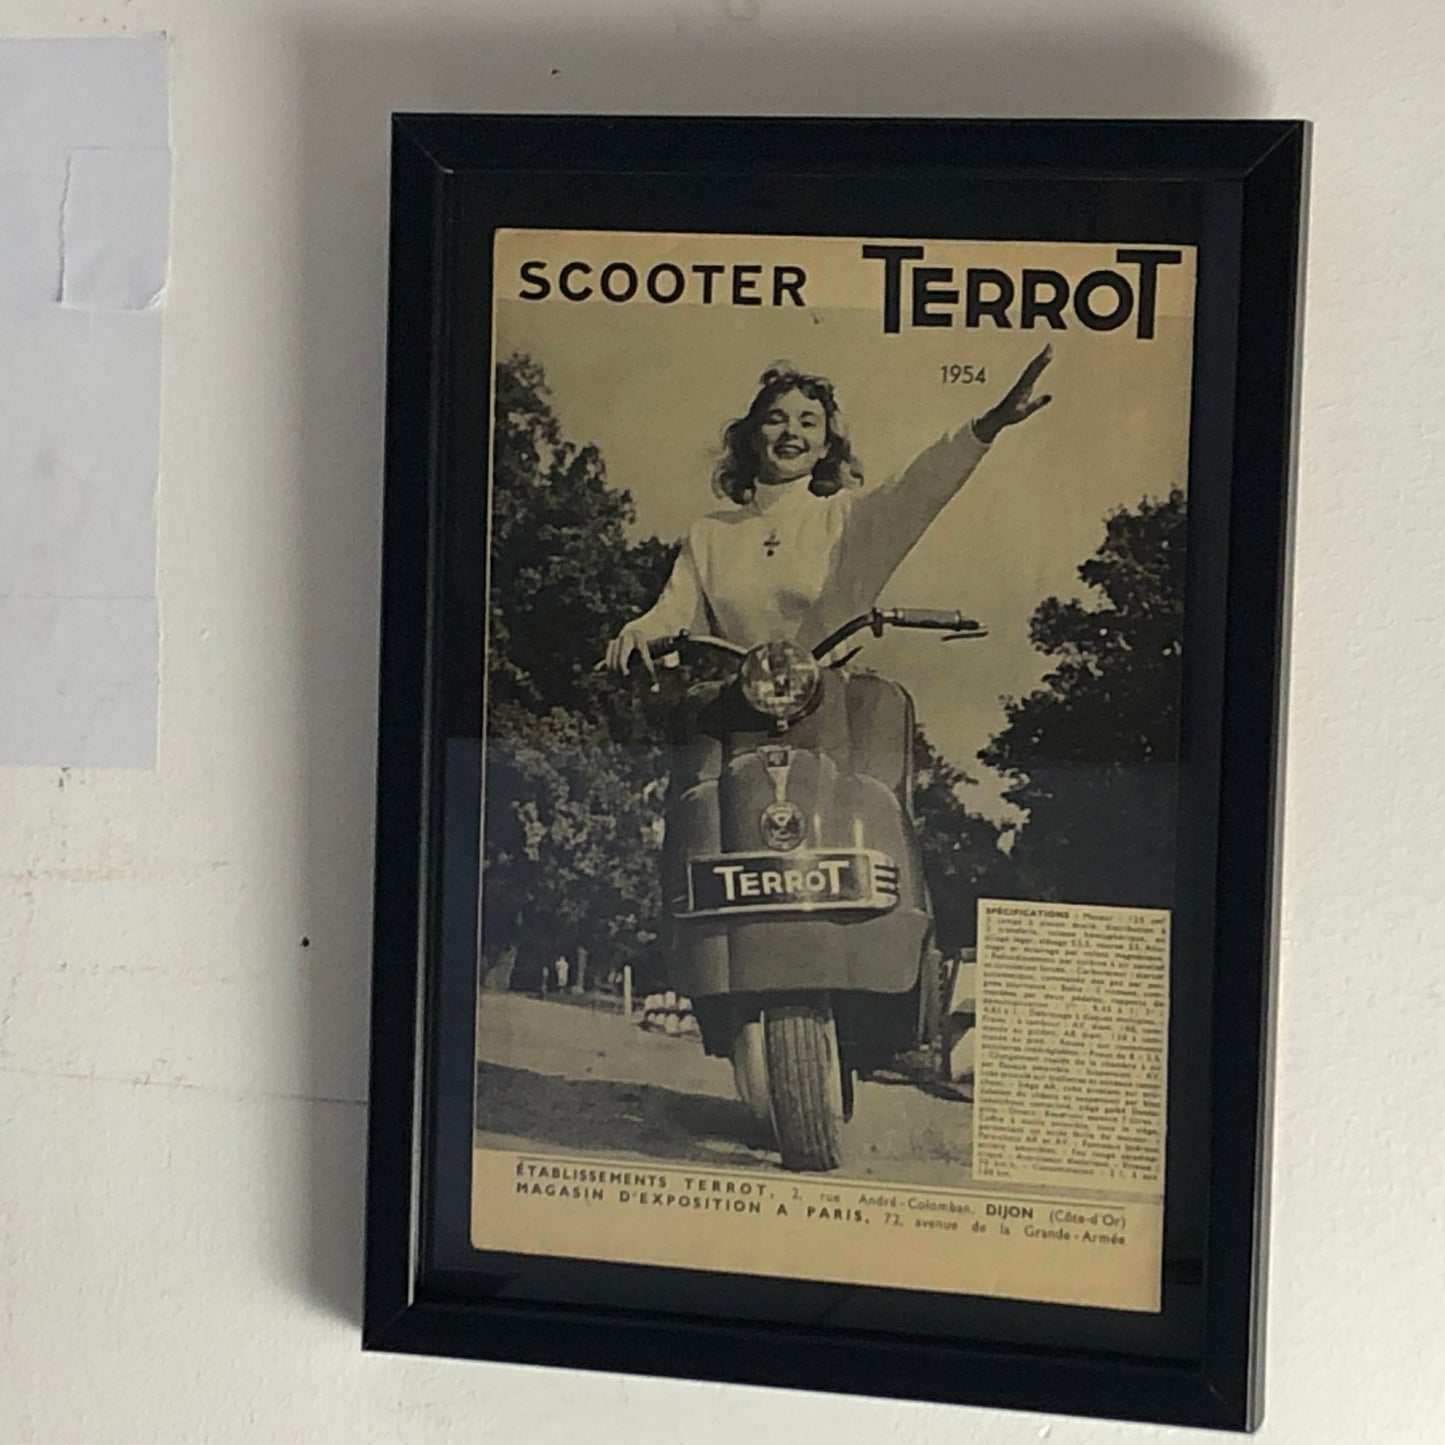 Terrot, Advertisement Year 1954 Terrot Scooter with Technical Specifications in French